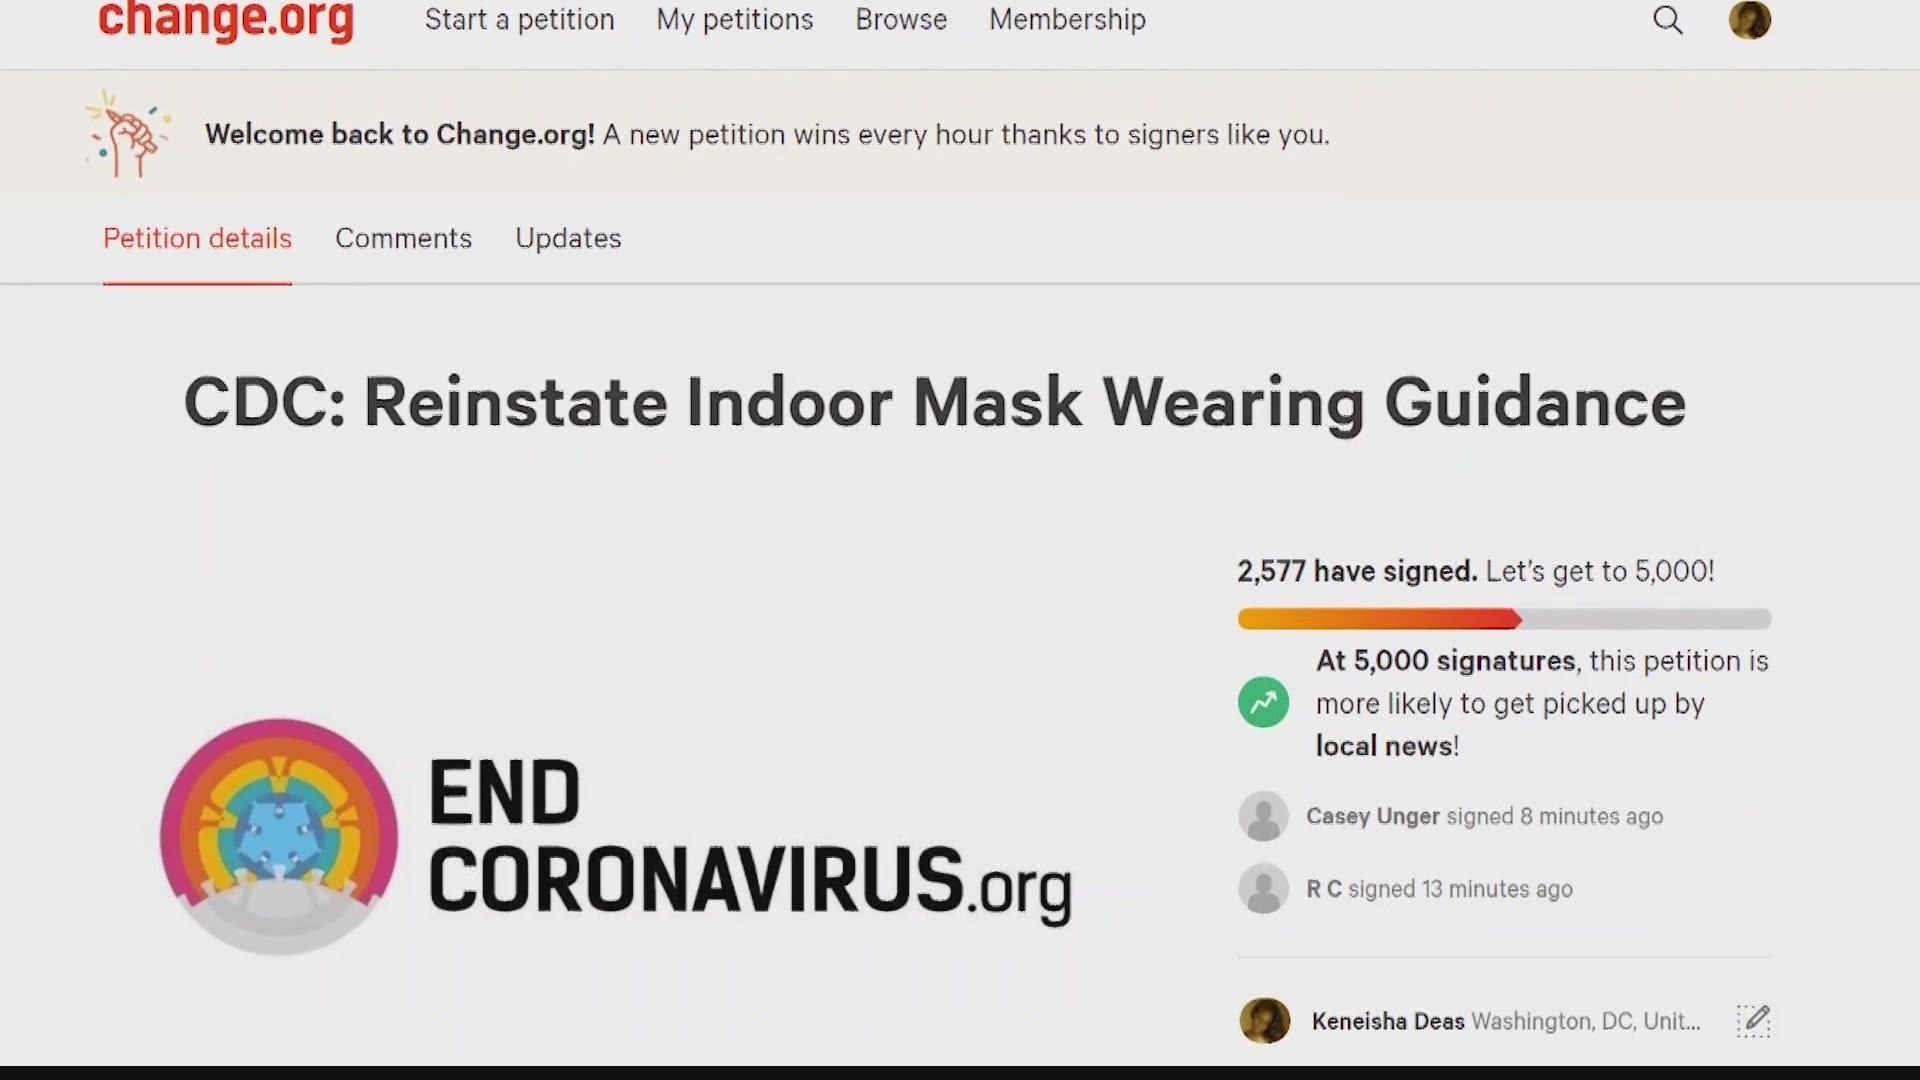 One group, Endcoronavirus.org, is petitioning for the CDC to reverse its indoor mask guidelines as the Delta variant emerges.